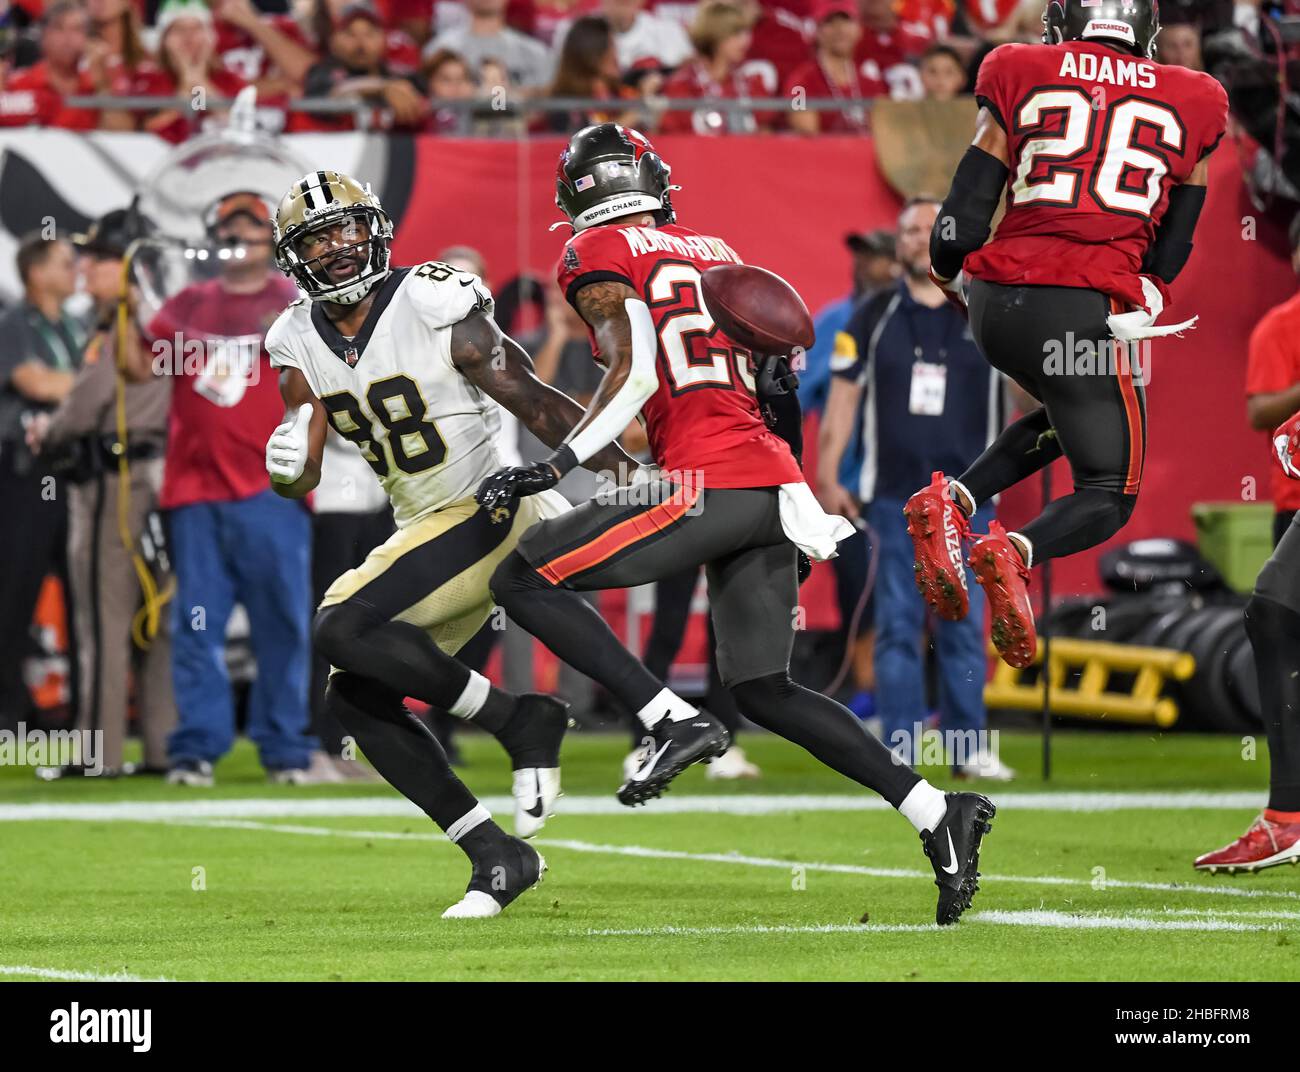 Tampa, United States. 19th Dec, 2021. Tampa Bay Buccaneers' Andrew Adams (26) and Sean Murphy-Bunting (C) break up a pass intended for New Orleans Saints' Ty Montgomery II (88) during the second half at Raymond James Stadium in Tampa, Florida on Sunday, December 19, 2021. Photo by Steve Nesius/UPI Credit: UPI/Alamy Live News Stock Photo